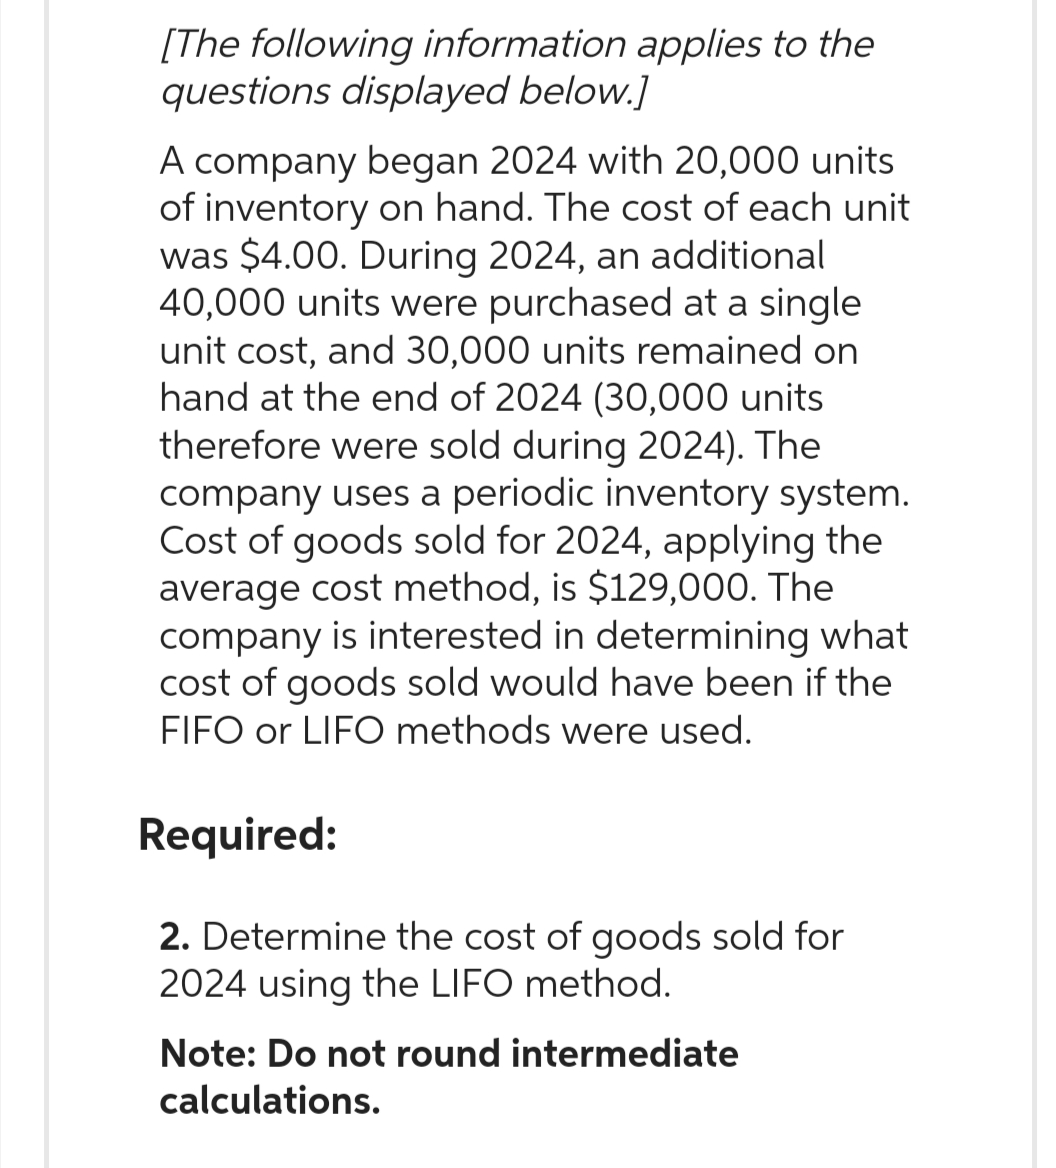 [The following information applies to the
questions displayed below.]
A company began 2024 with 20,000 units
of inventory on hand. The cost of each unit
was $4.00. During 2024, an additional
40,000 units were purchased at a single
unit cost, and 30,000 units remained on
hand at the end of 2024 (30,000 units
therefore were sold during 2024). The
company uses a periodic inventory system.
Cost of goods sold for 2024, applying the
average cost method, is $129,000. The
company is interested in determining what
cost of goods sold would have been if the
FIFO or LIFO methods were used.
Required:
2. Determine the cost of goods sold for
2024 using the LIFO method.
Note: Do not round intermediate
calculations.